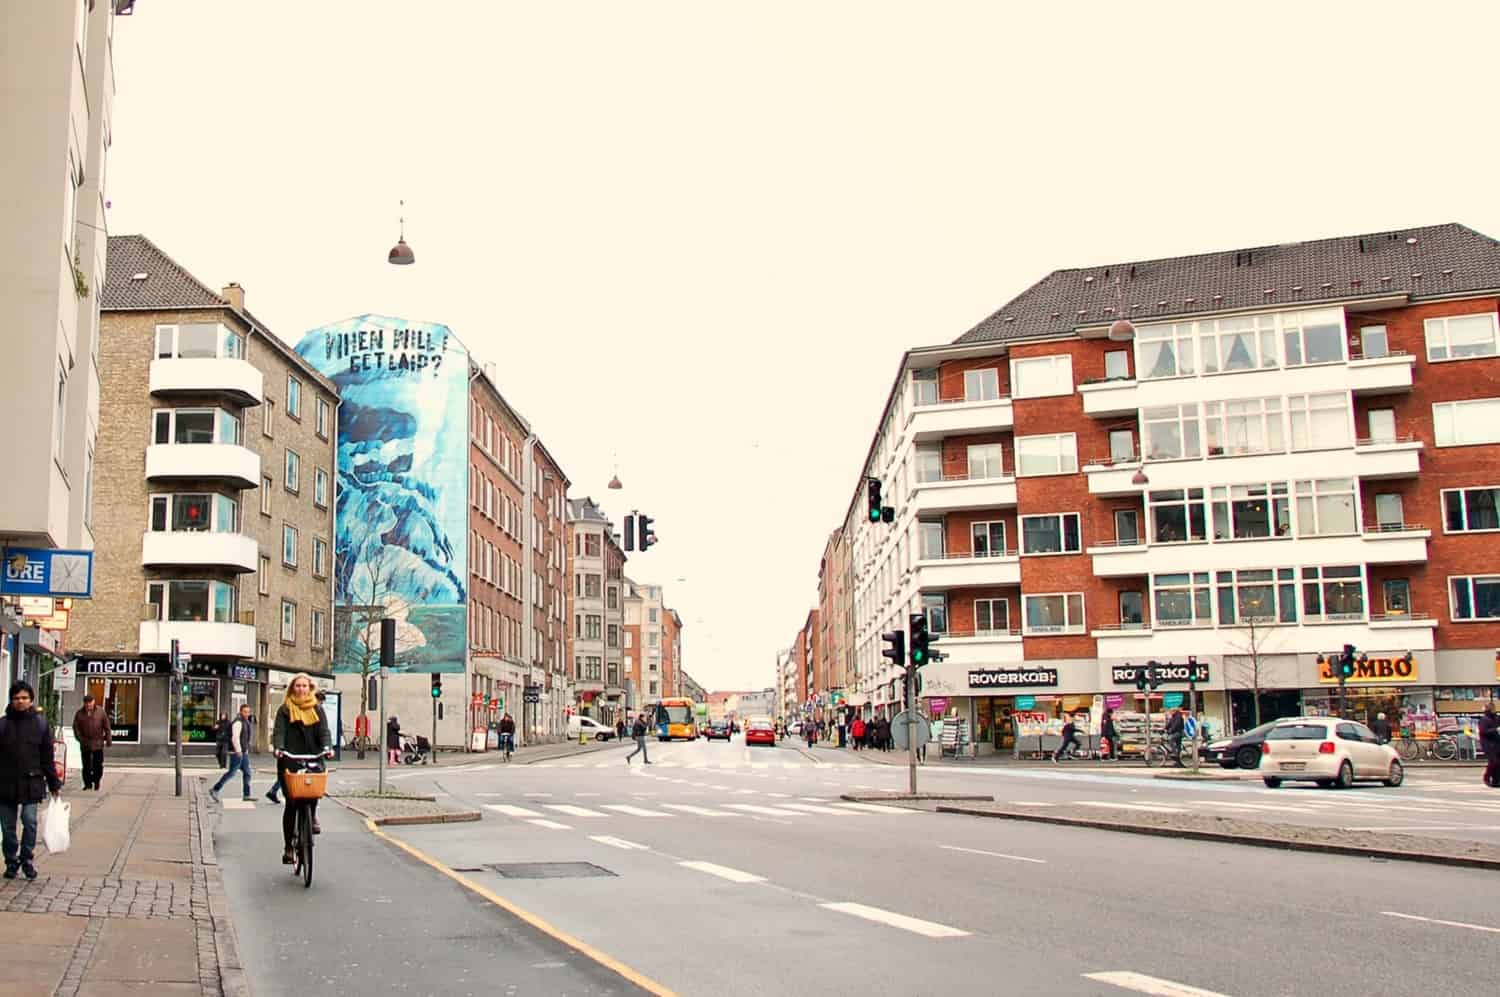 Riding through Nørrebro will also expose you to some compelling pieces of street art.